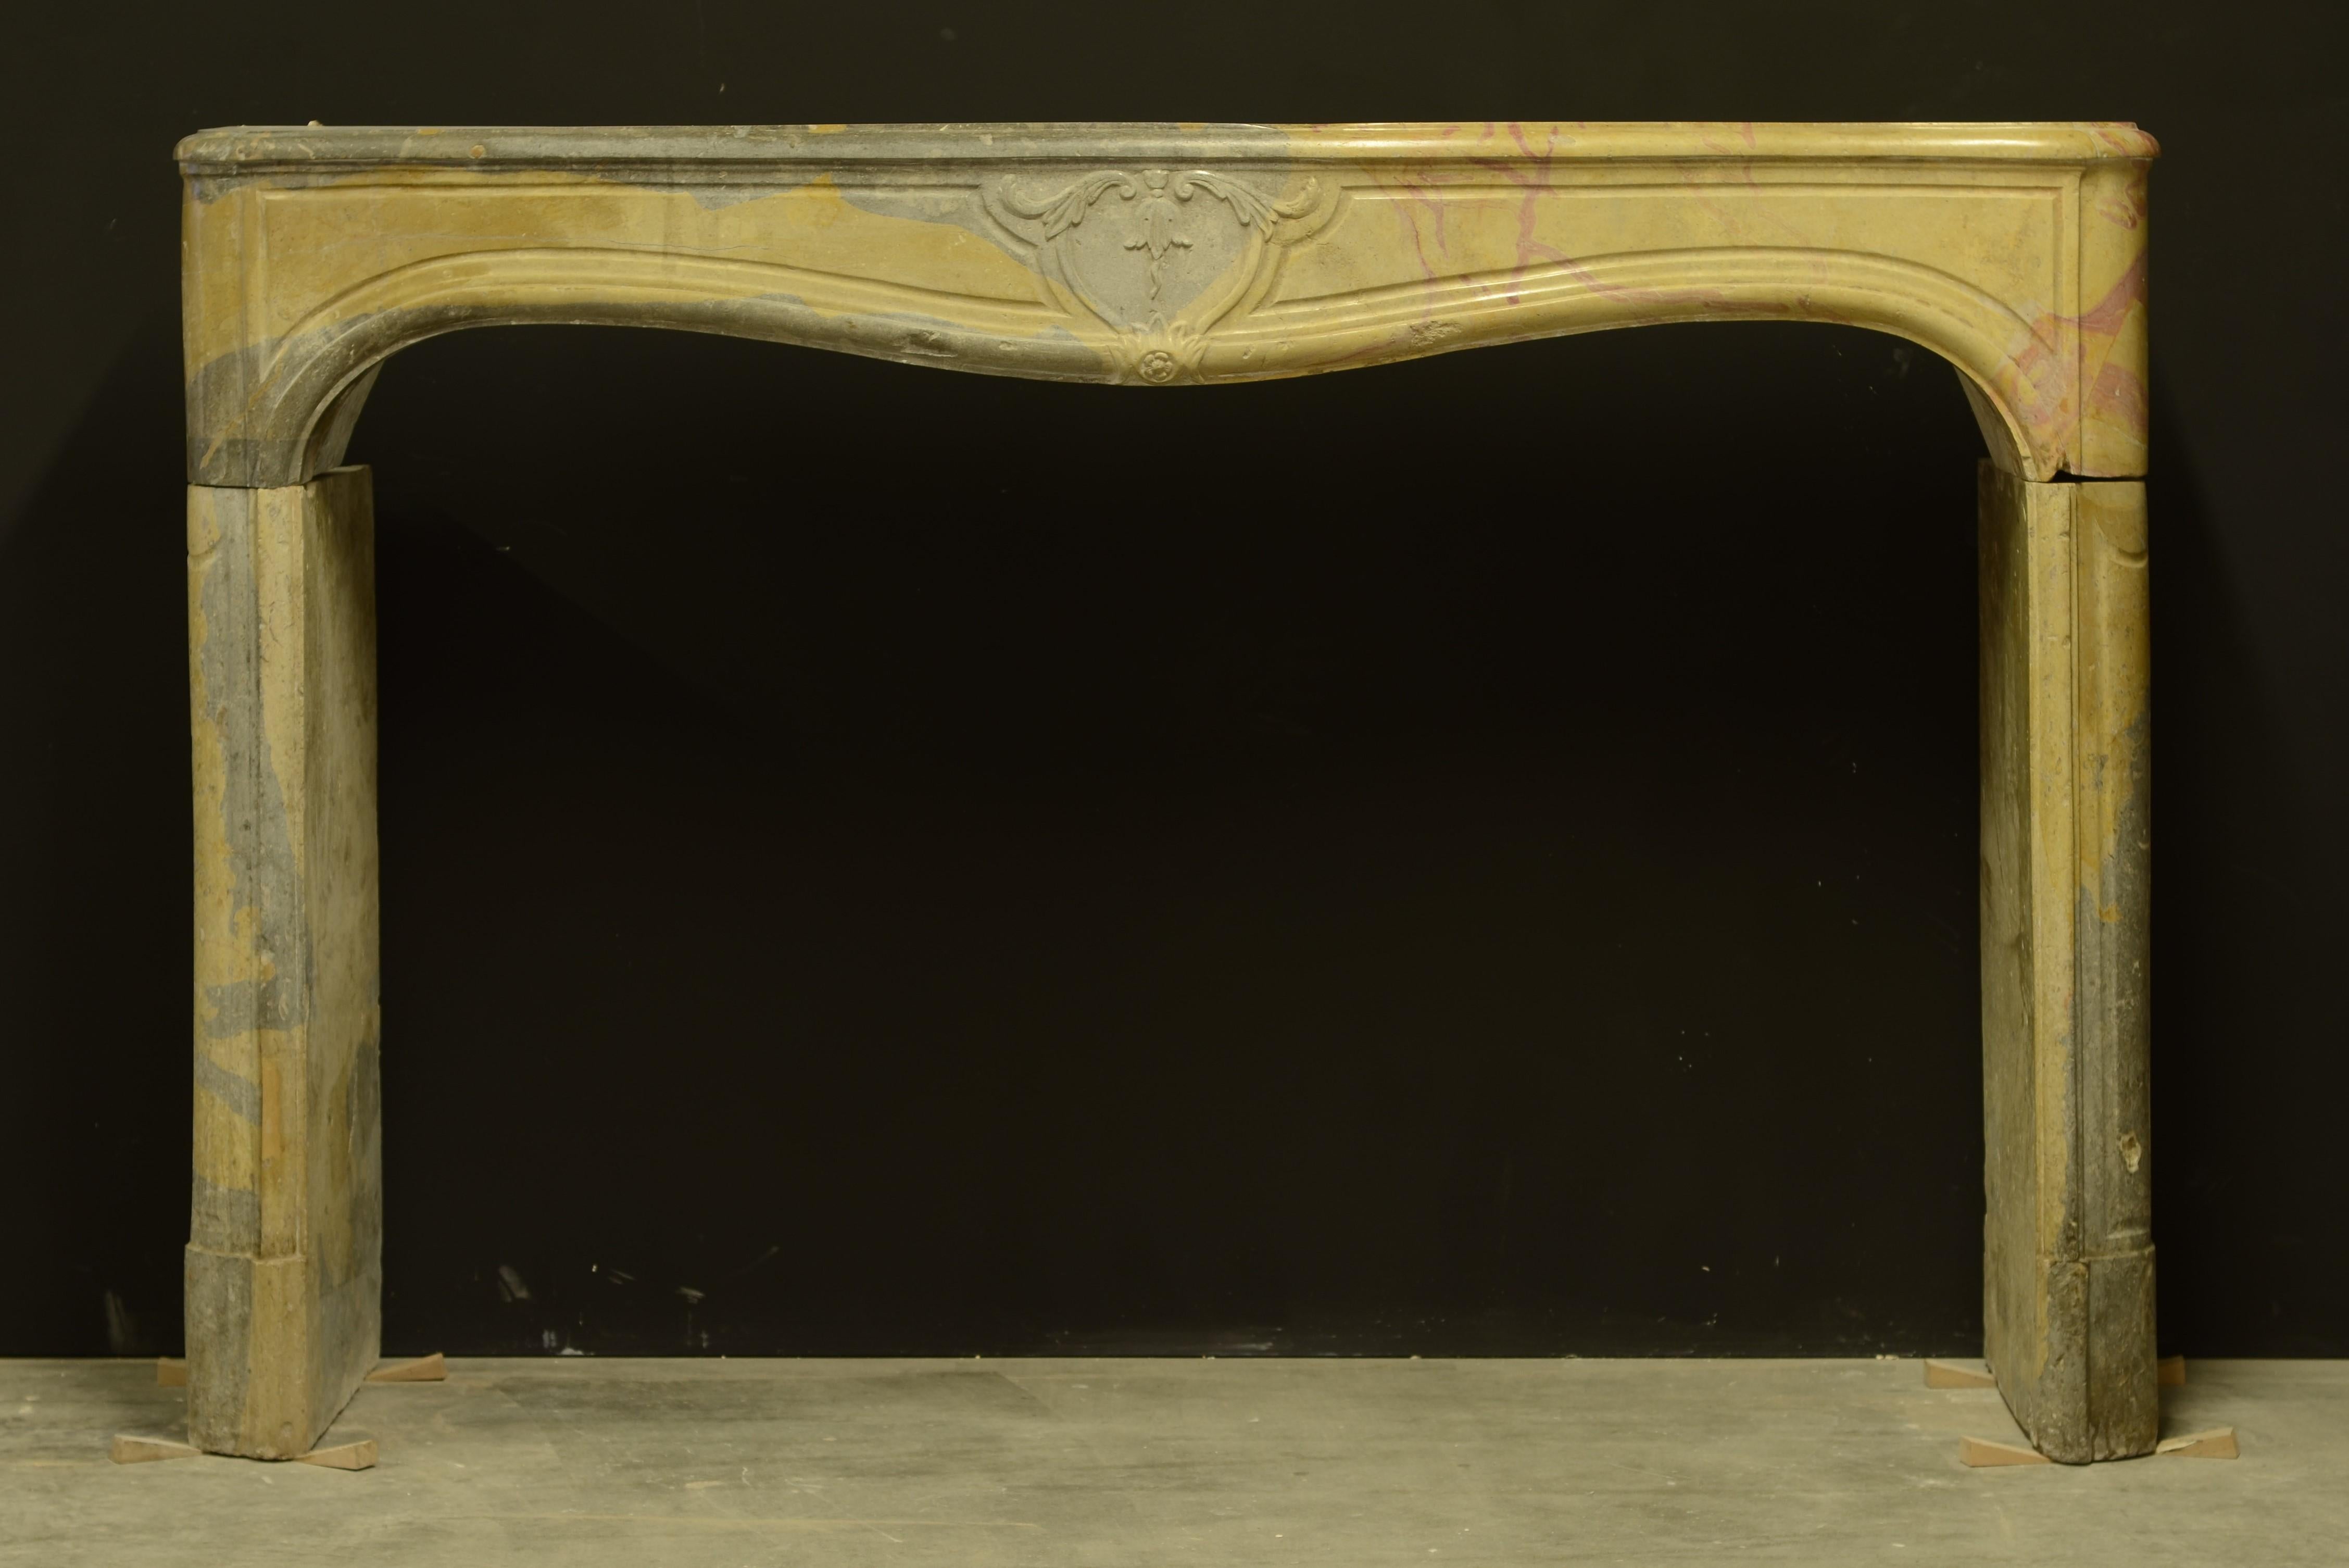 Antique limestone fireplace, 18th century Louis XV, France.

This lovely bi-color limestone fireplace from the Burgundy area in France is very elegant and subtle decorated. Its simple slim legs support the frieze with a beautiful central